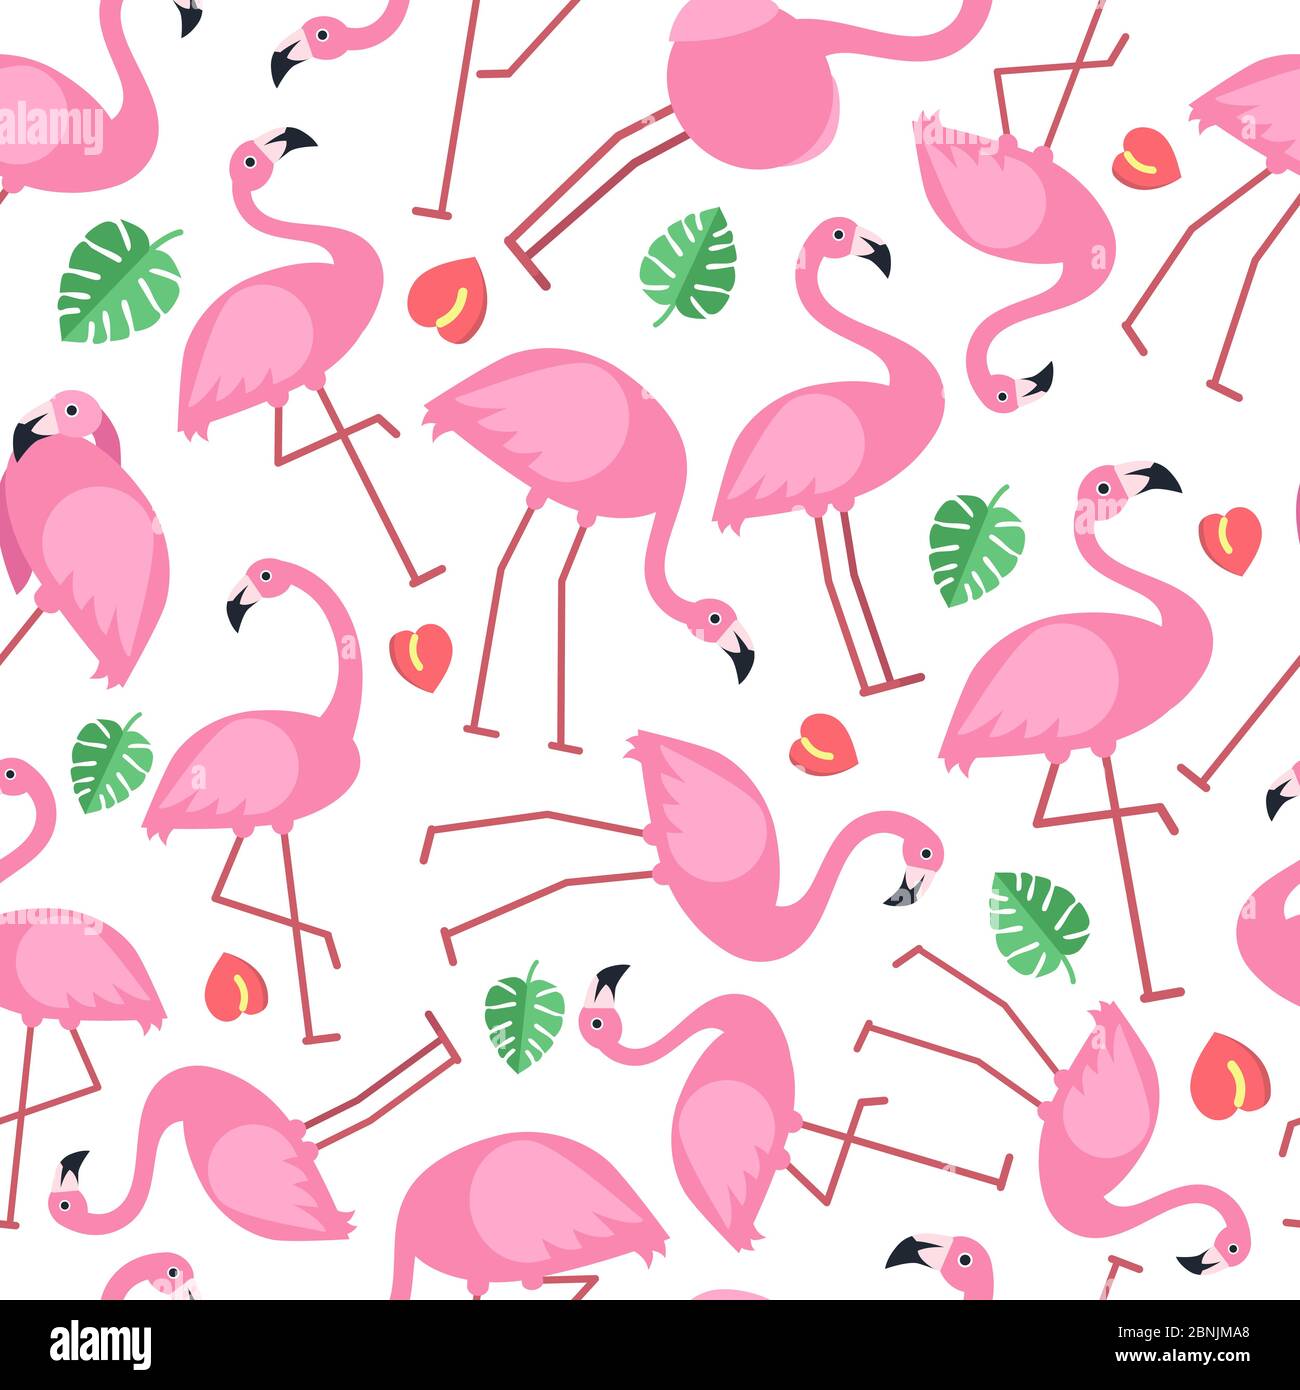 Pink flamingo pictures Stock Vector Images - Alamy